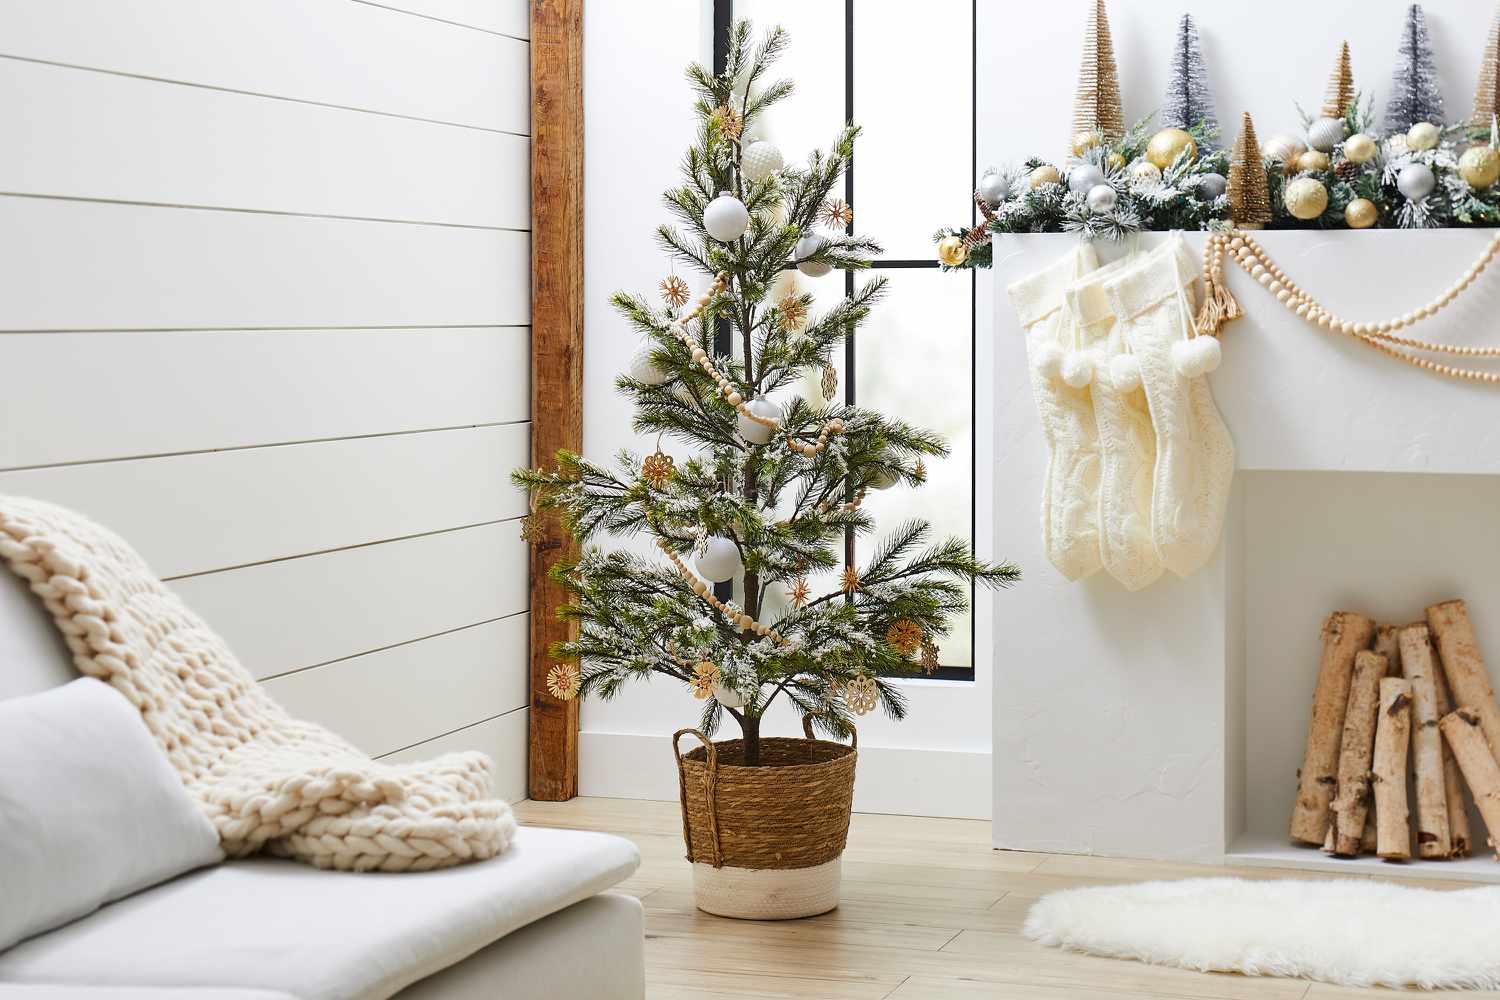 Bringing Nostalgia to Your Christmas Décor: 14 Creative Ways to Incorporate Vintage Finds